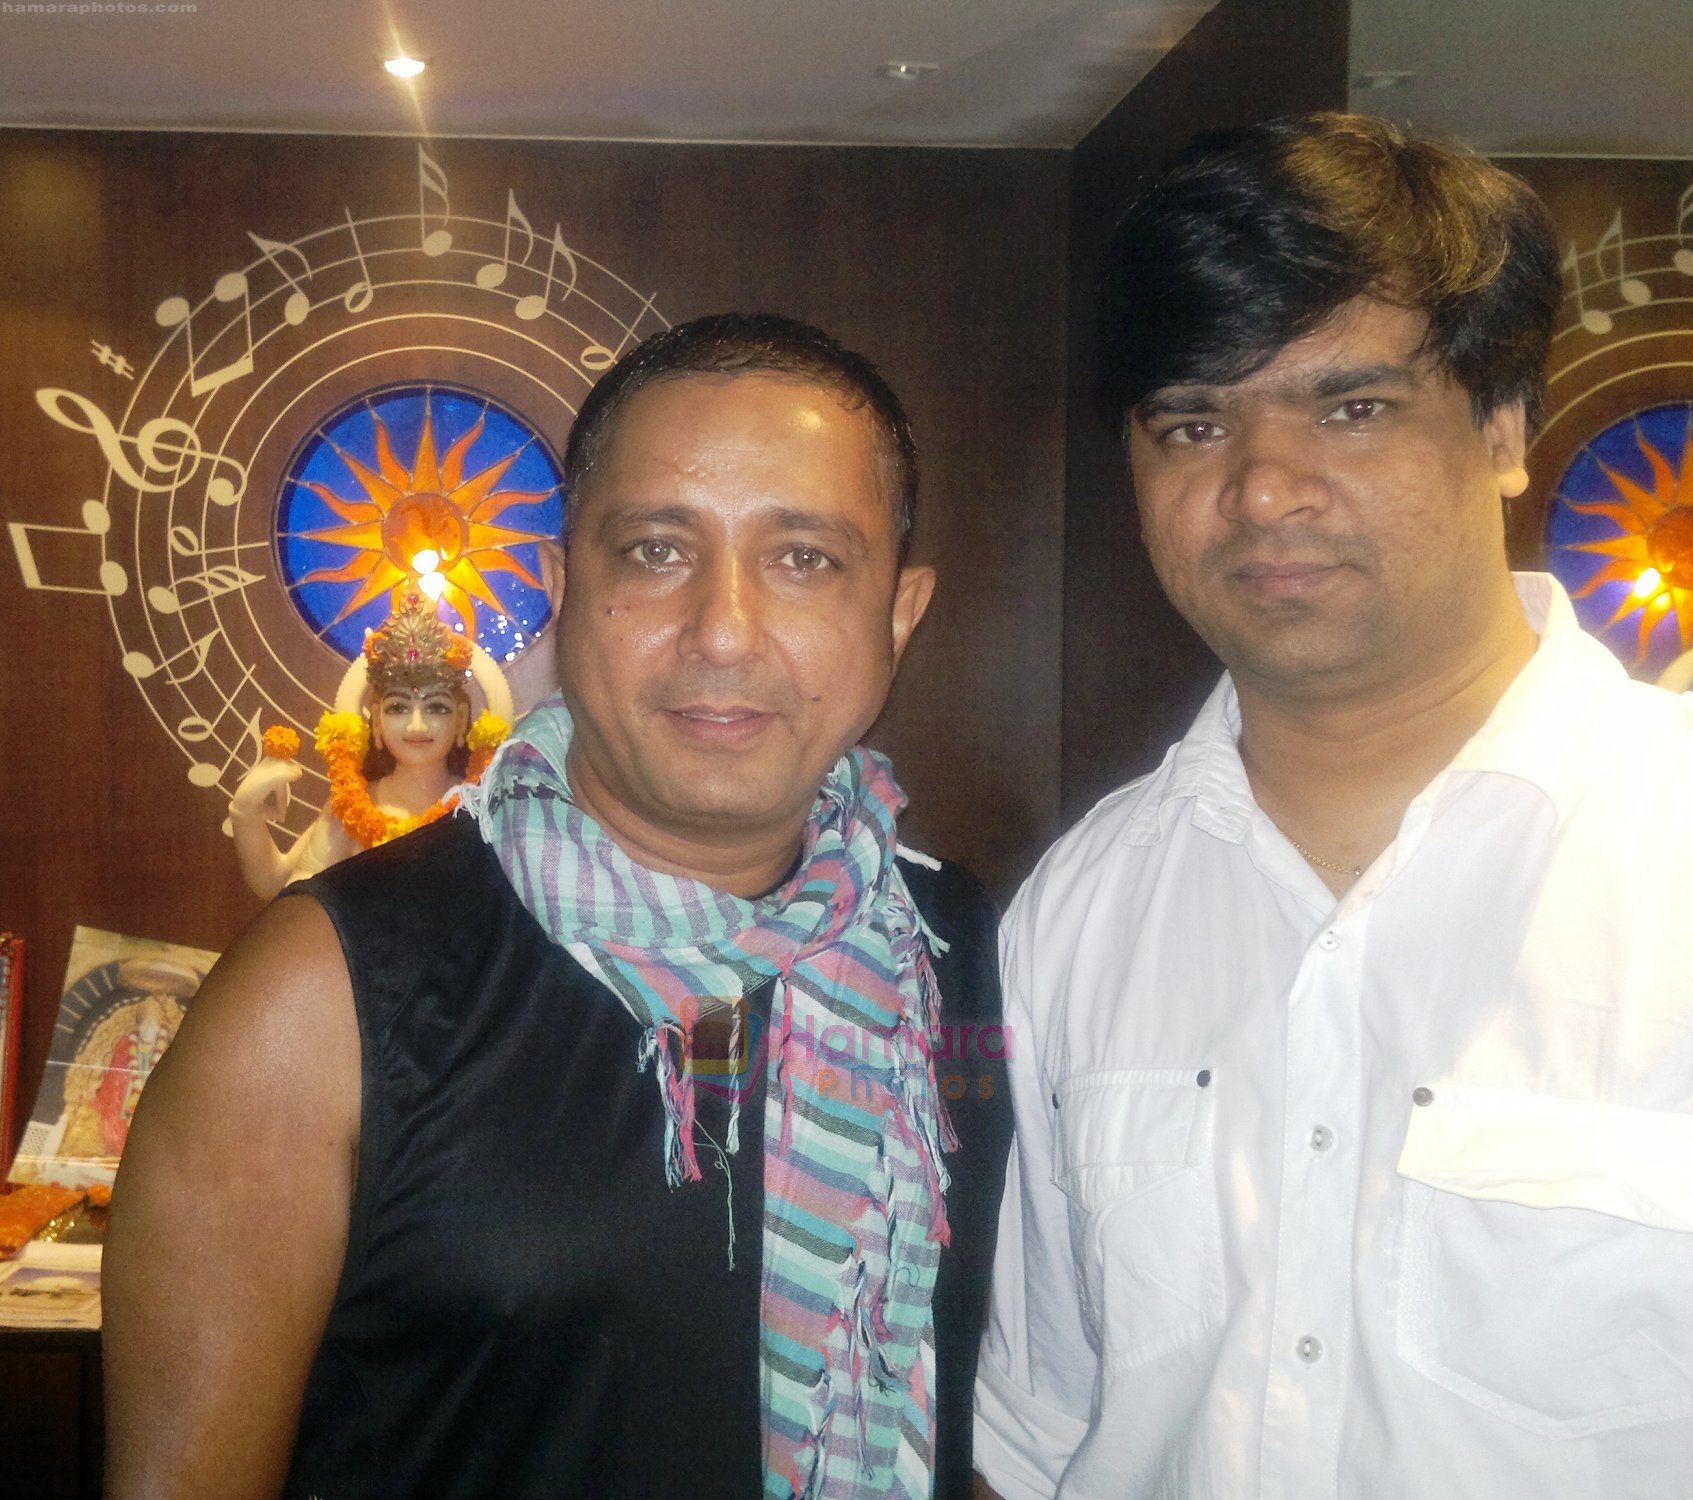 Sukhwinder Singh with host Narendra Singh of Filmy Box at the celebration of Sai Ram, a devotional album